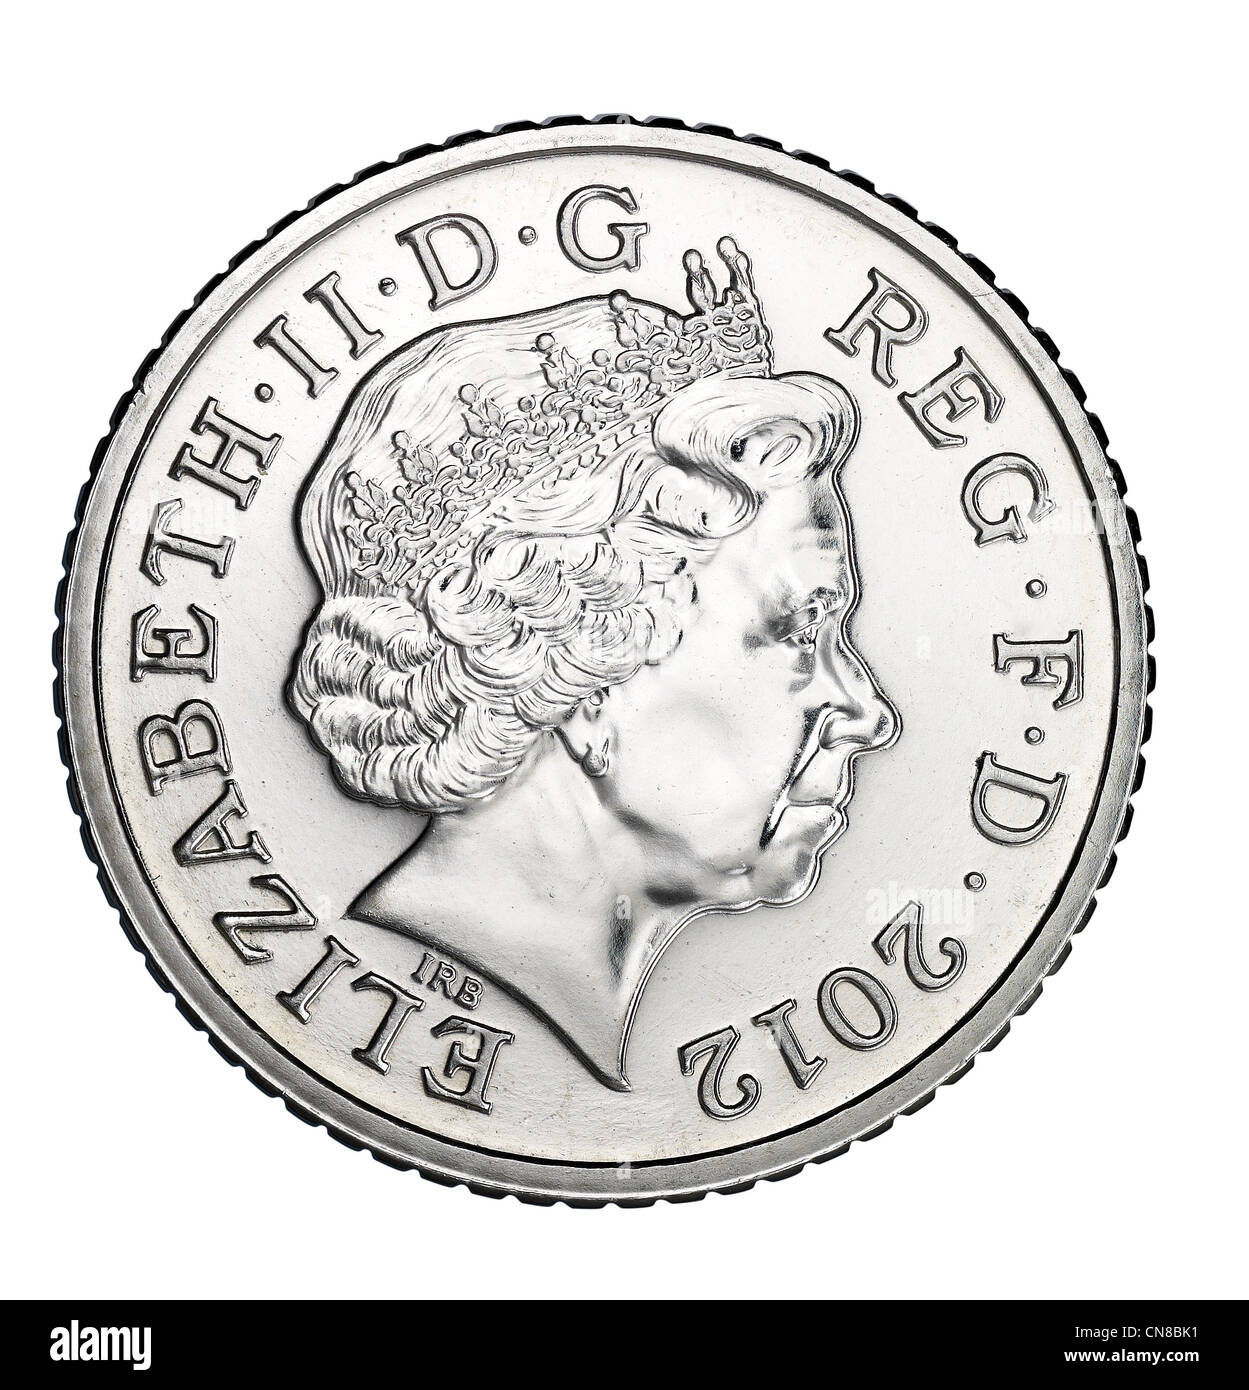 5p five pence coin head on obverse heads 2012 Stock Photo